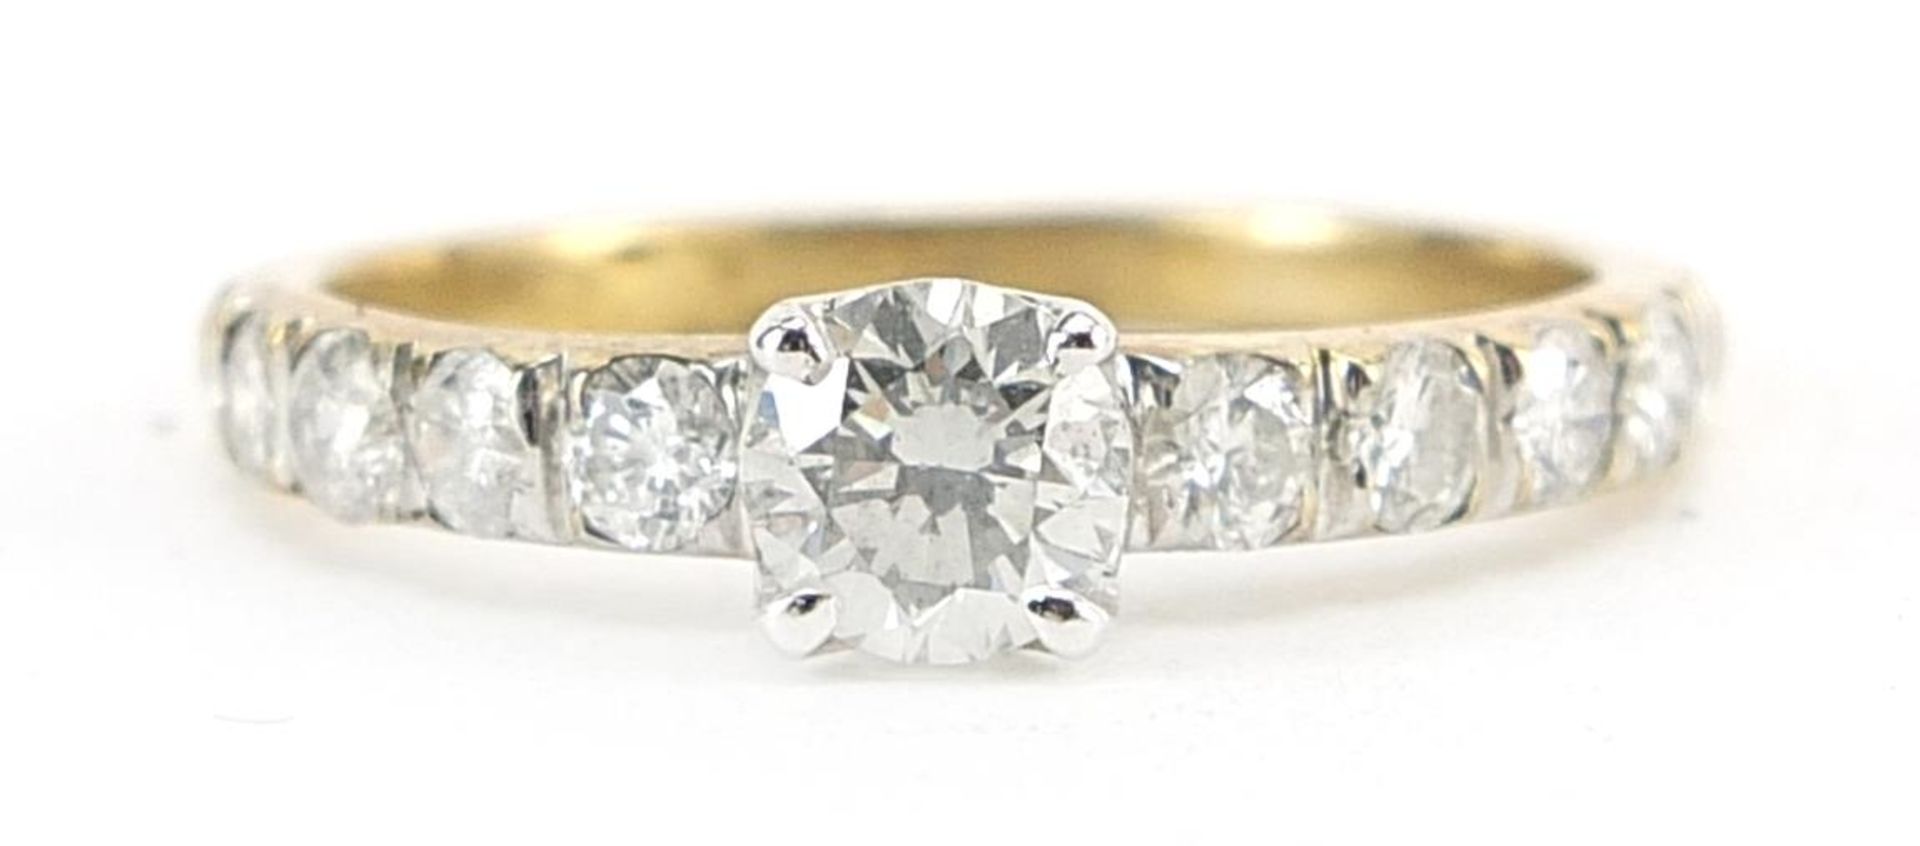 9ct gold diamond ring with diamond set shoulders, the largest diamond approximately 0.45ct, the